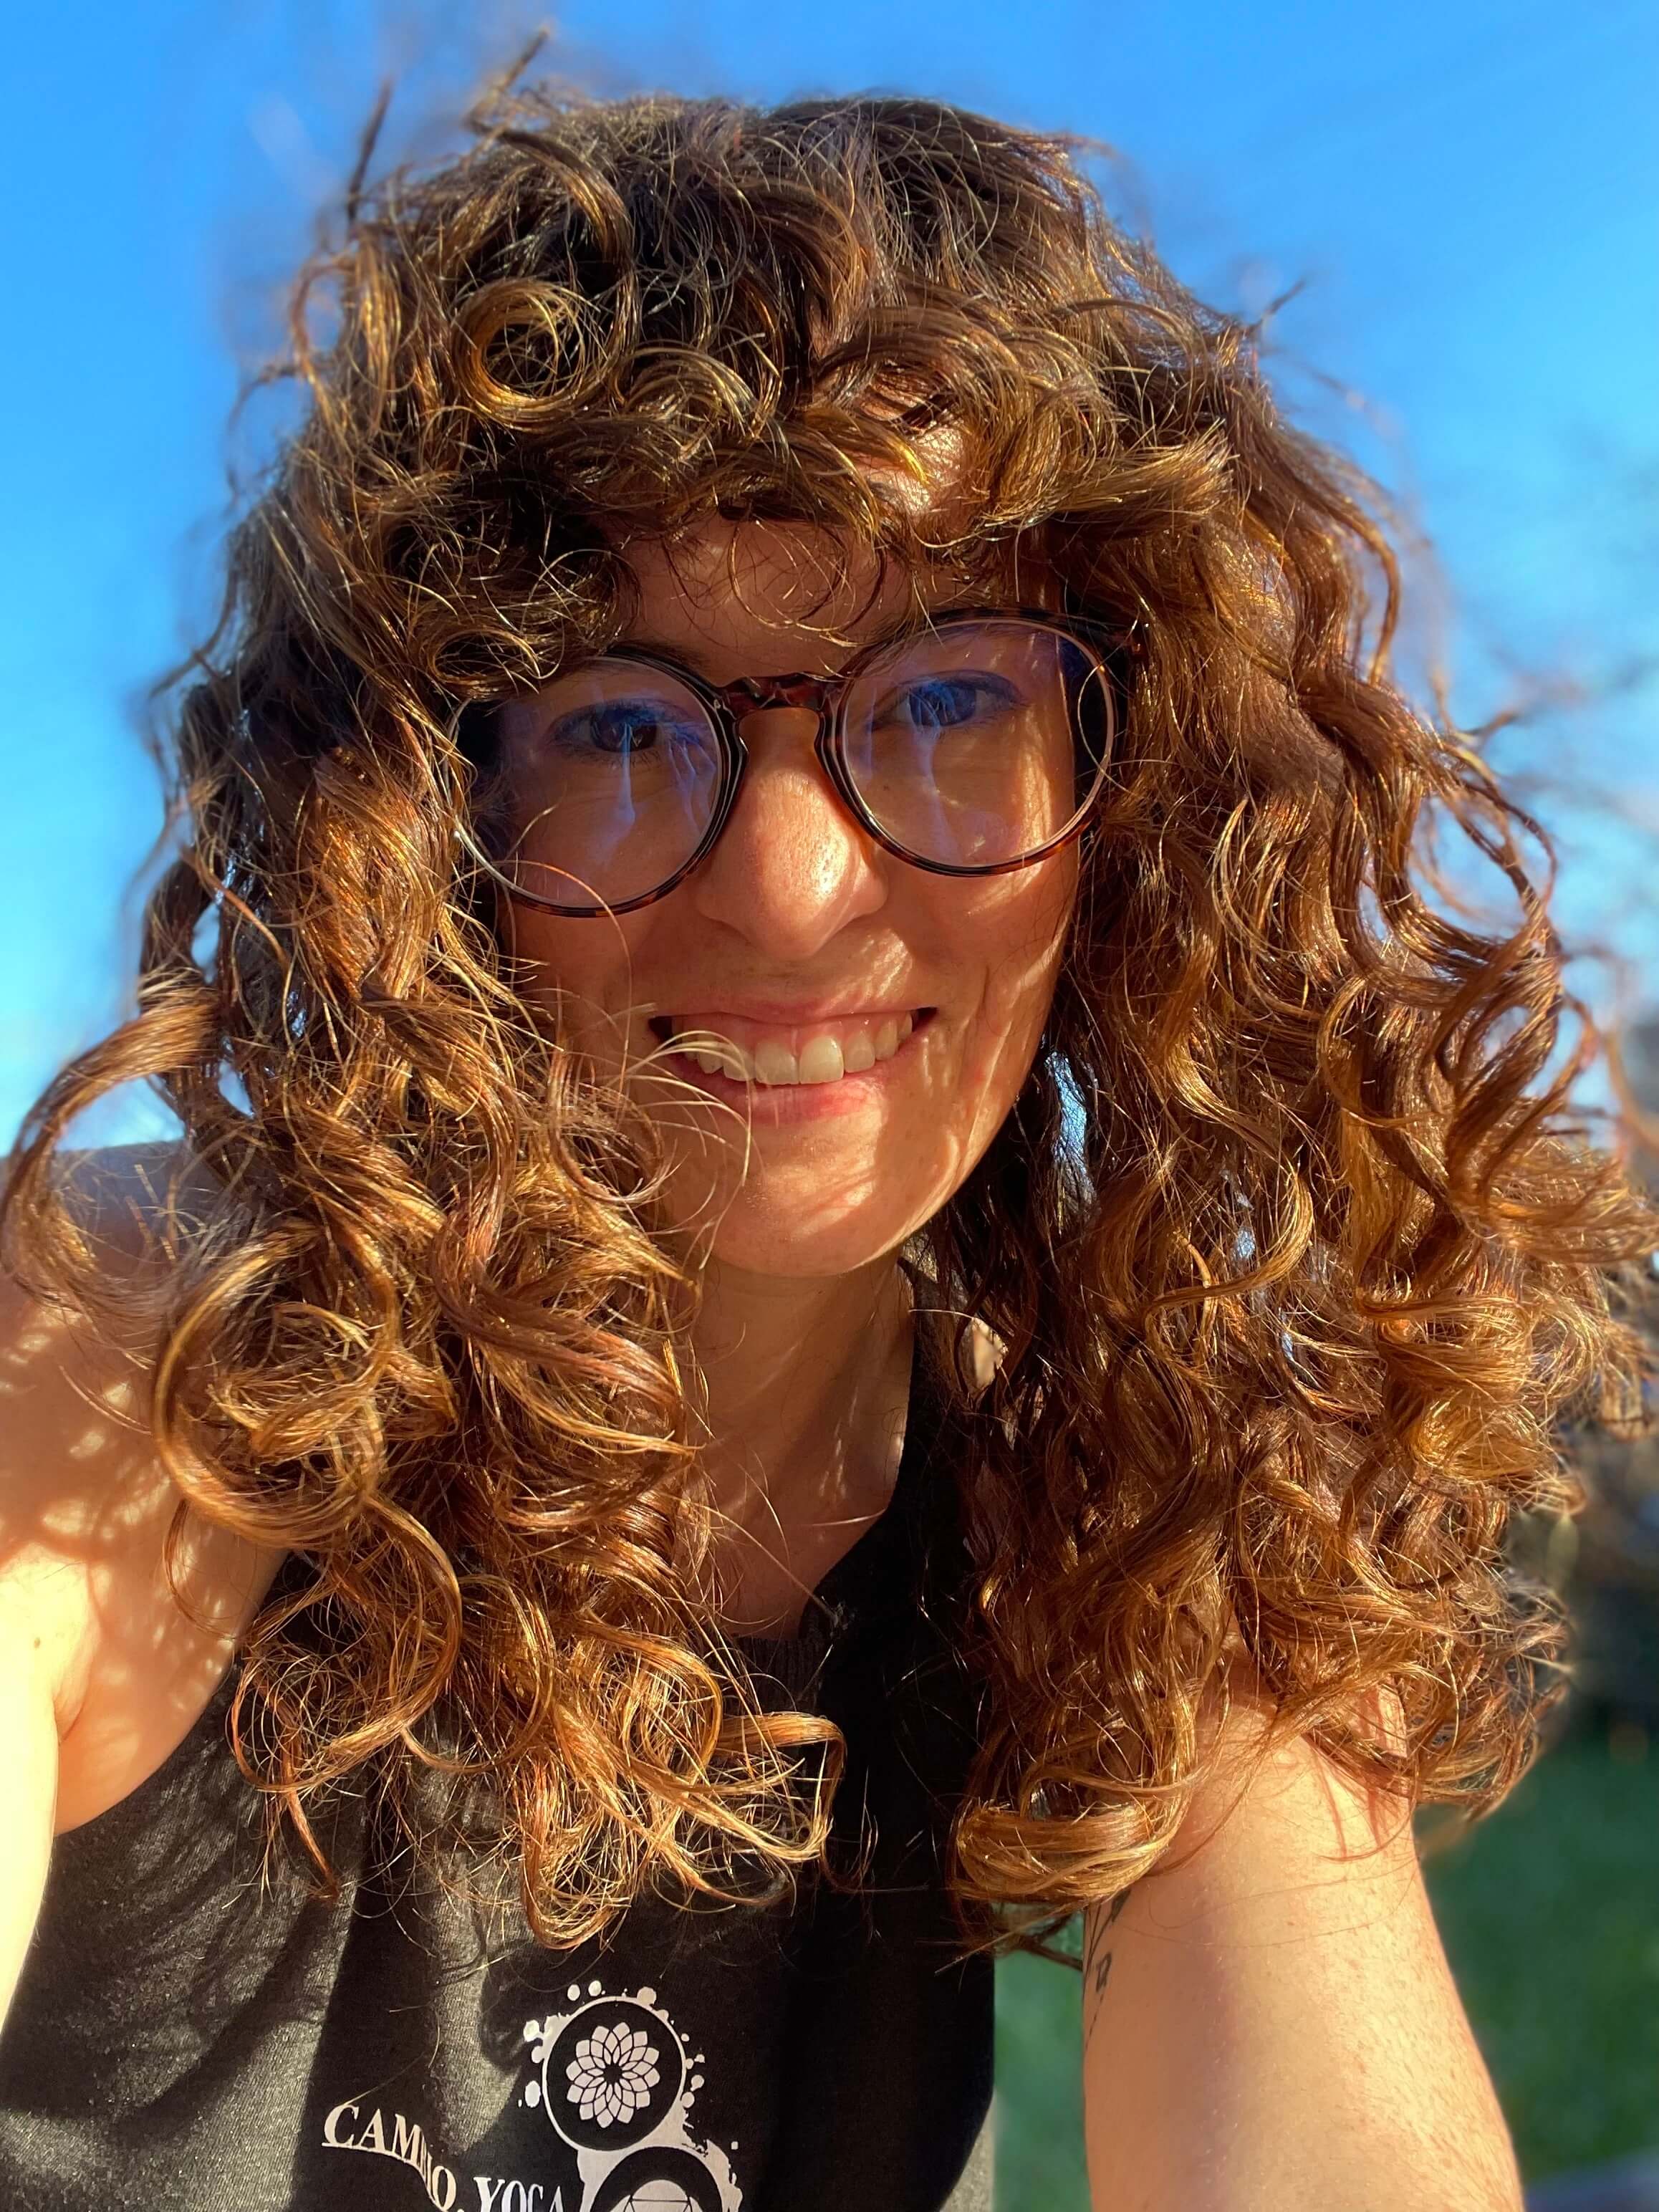 Photo of Erika outside, with her curly hair blowing in her face